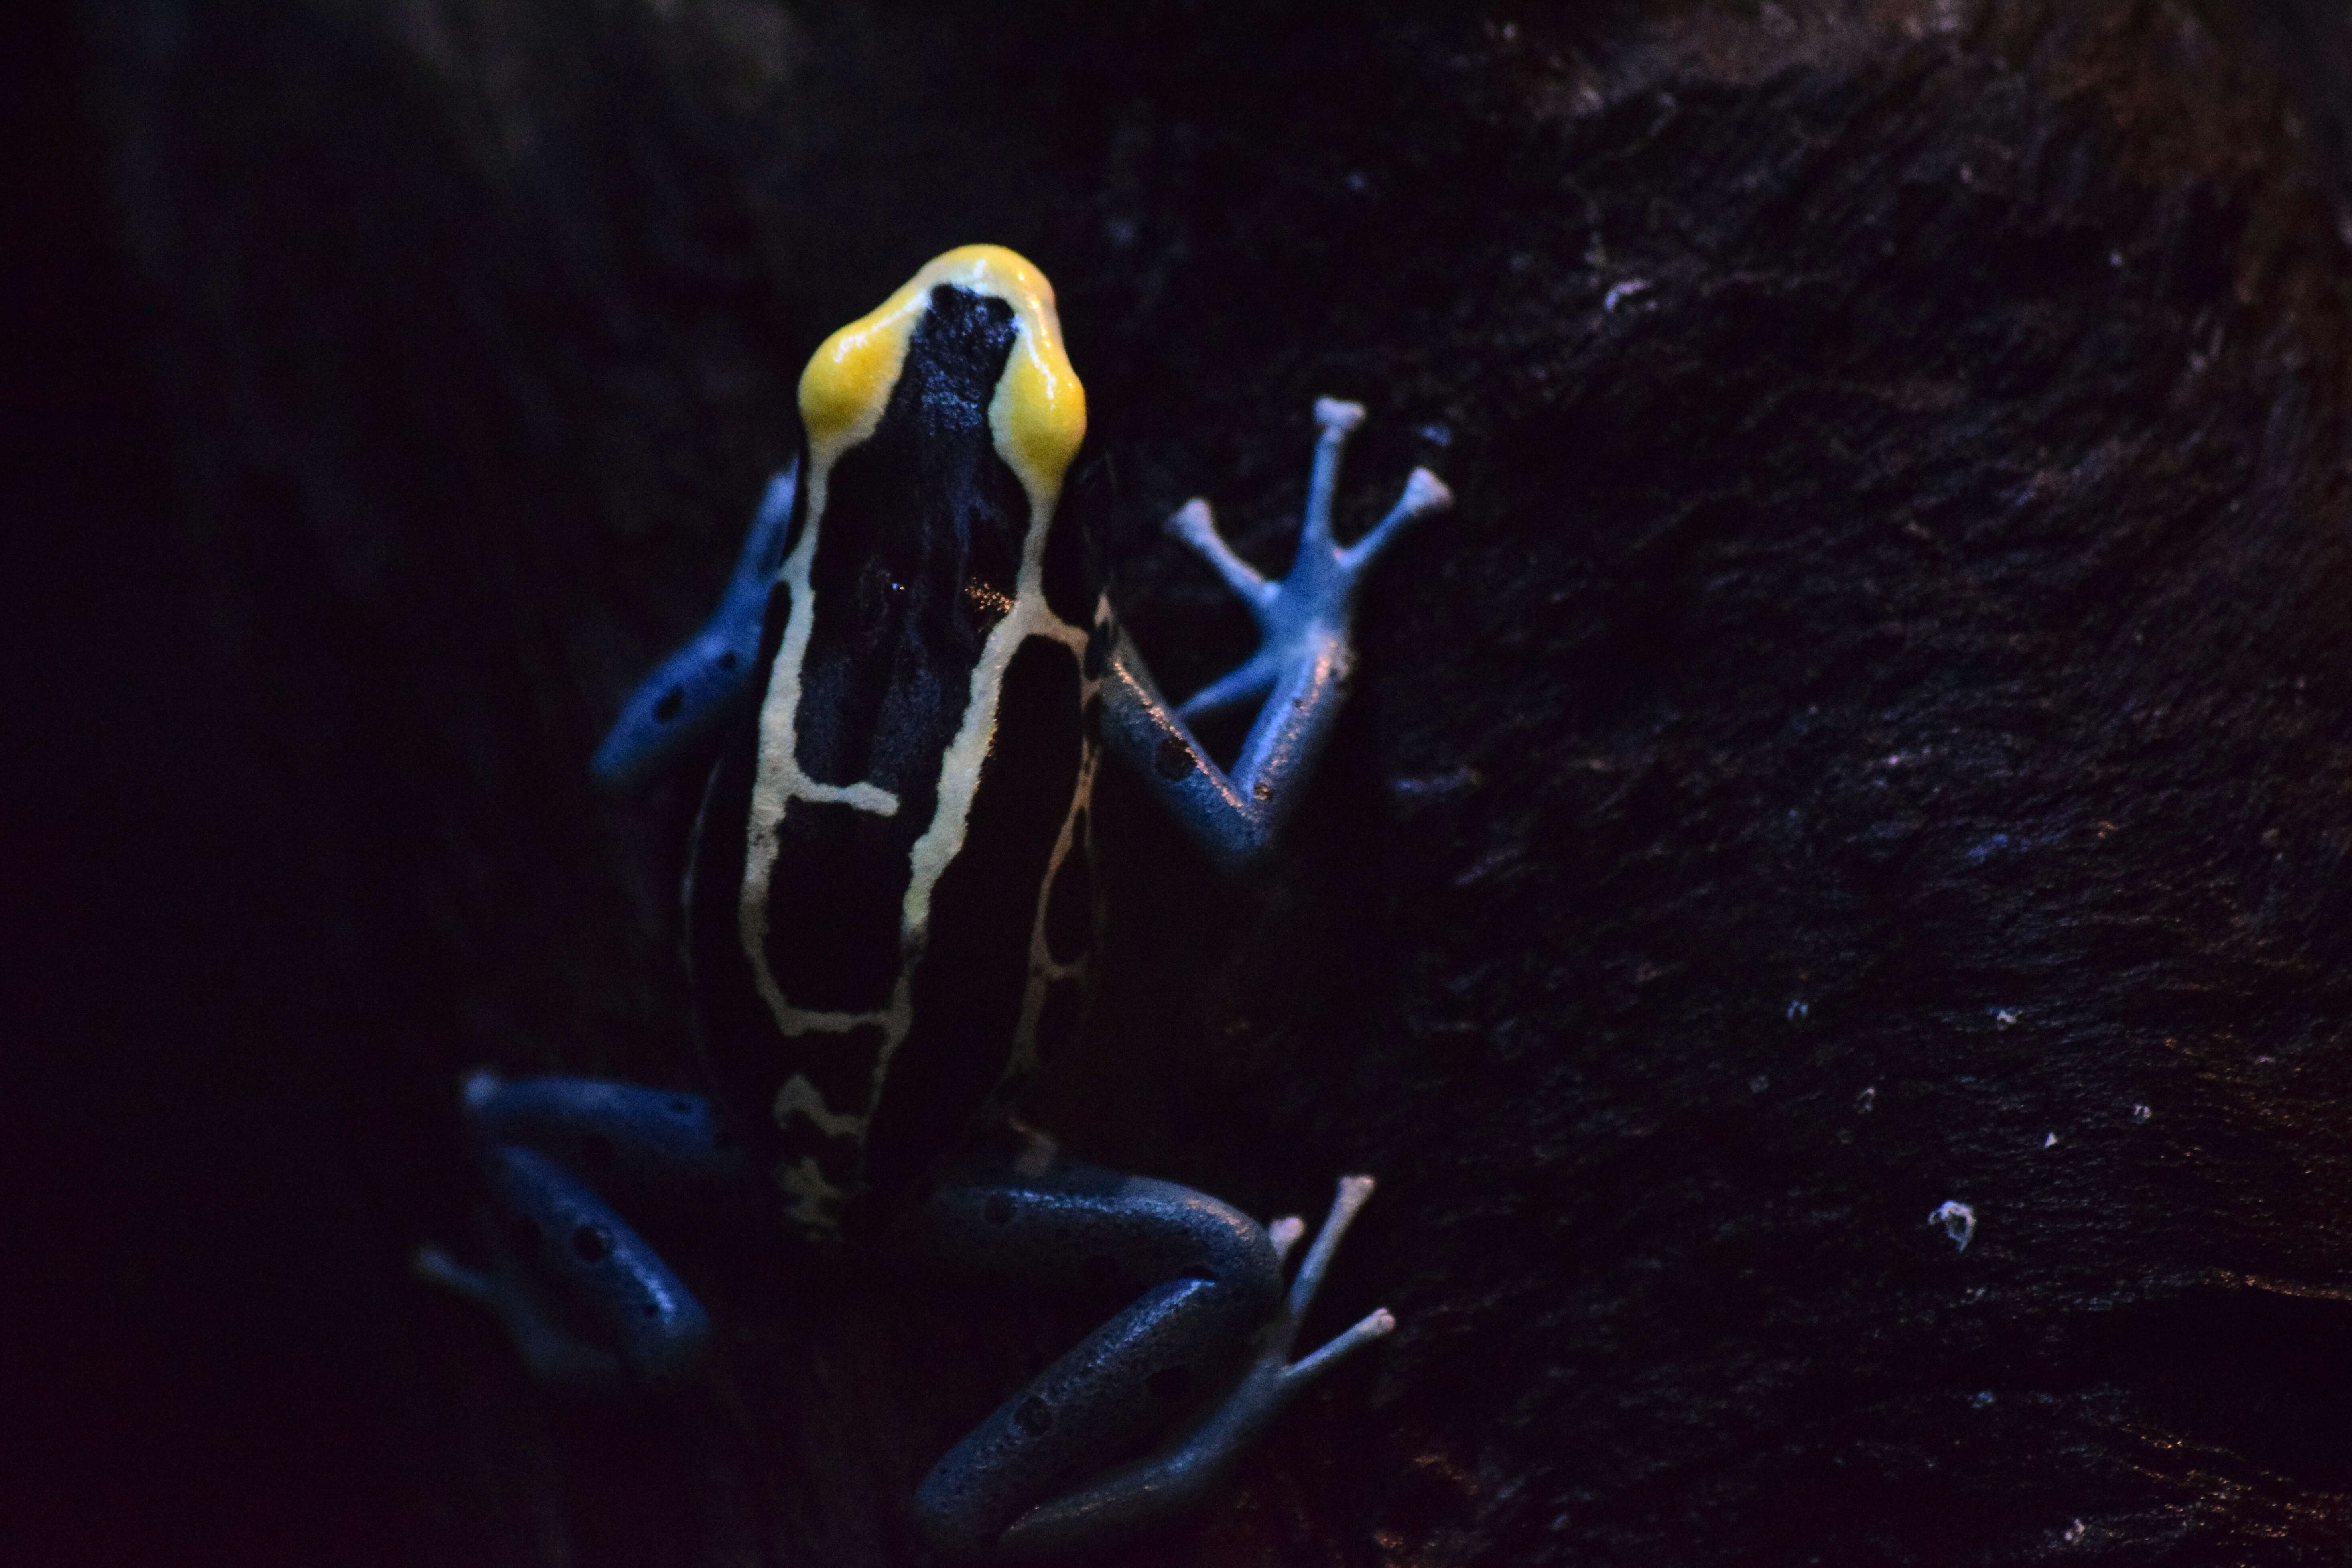 Image of Dyeing Poison Frog